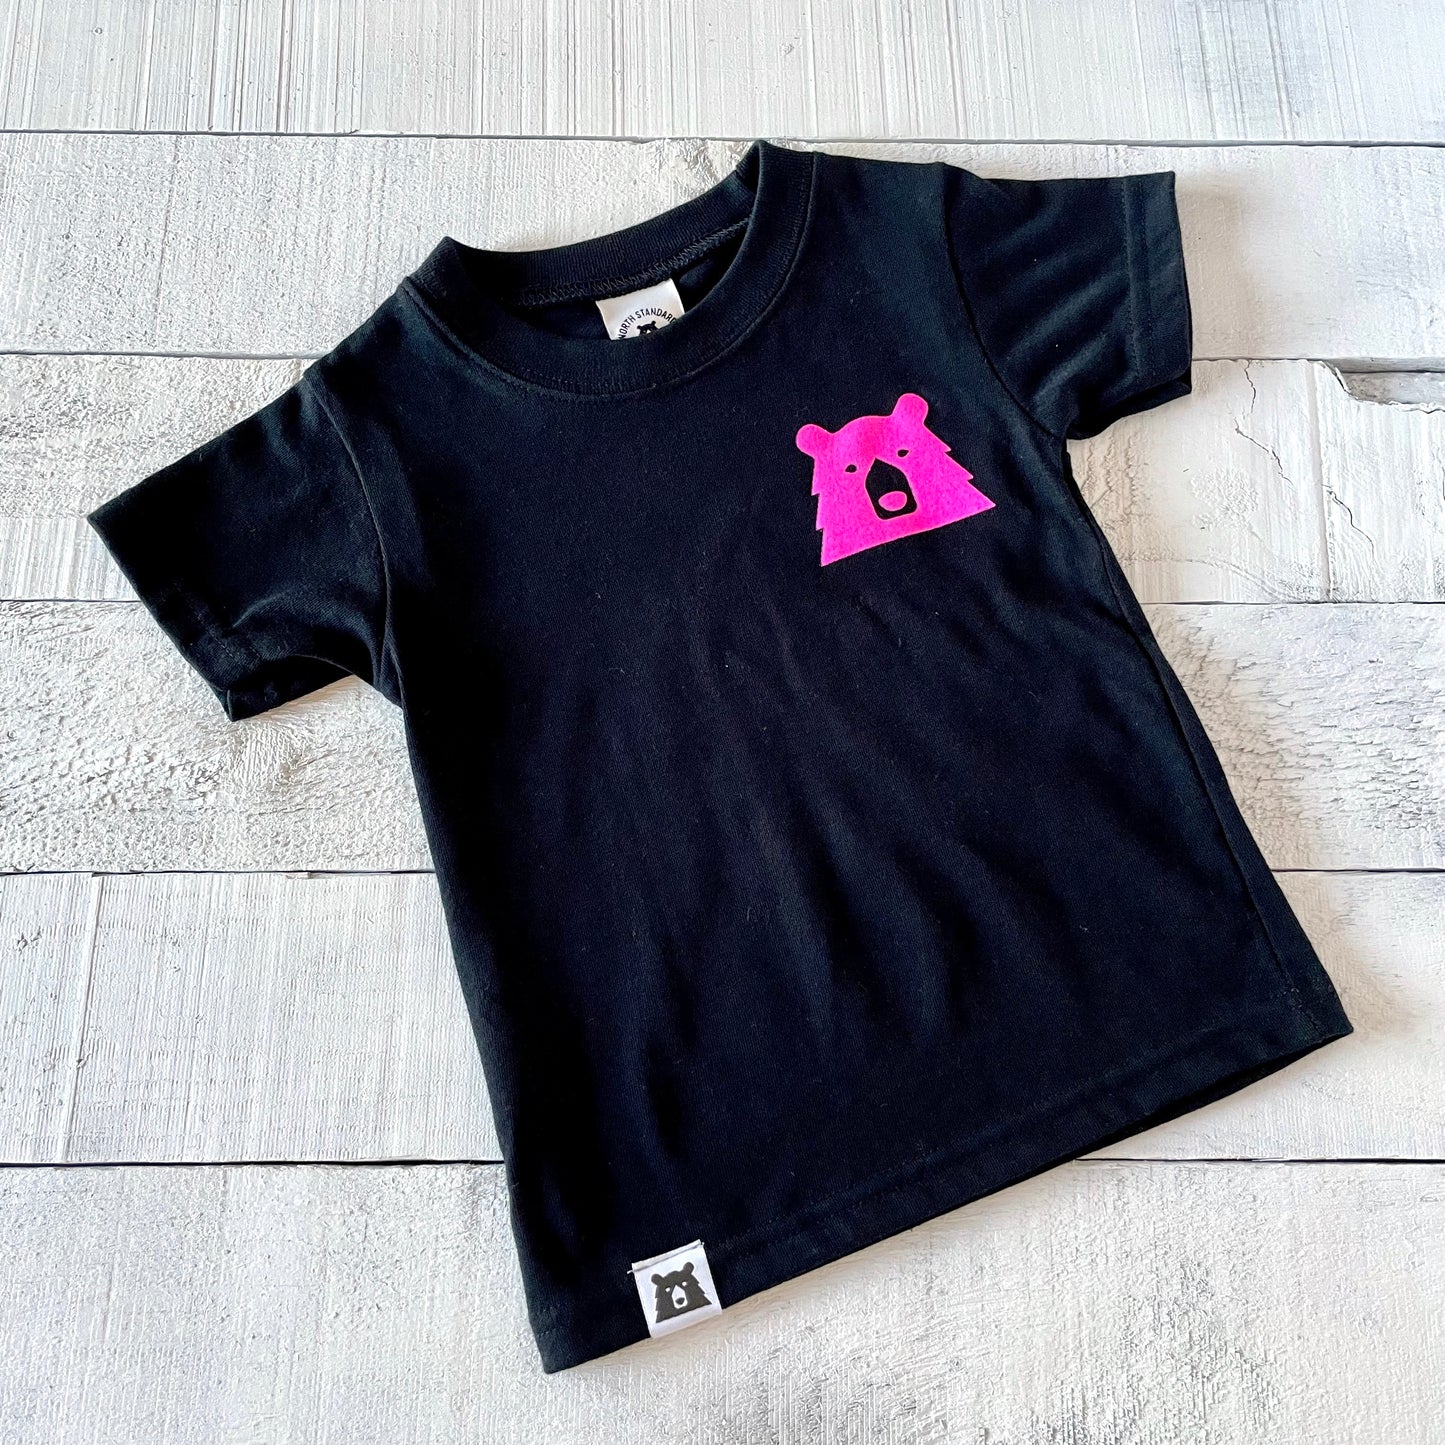 Kids Mascot Tee - Black with Hot Pink